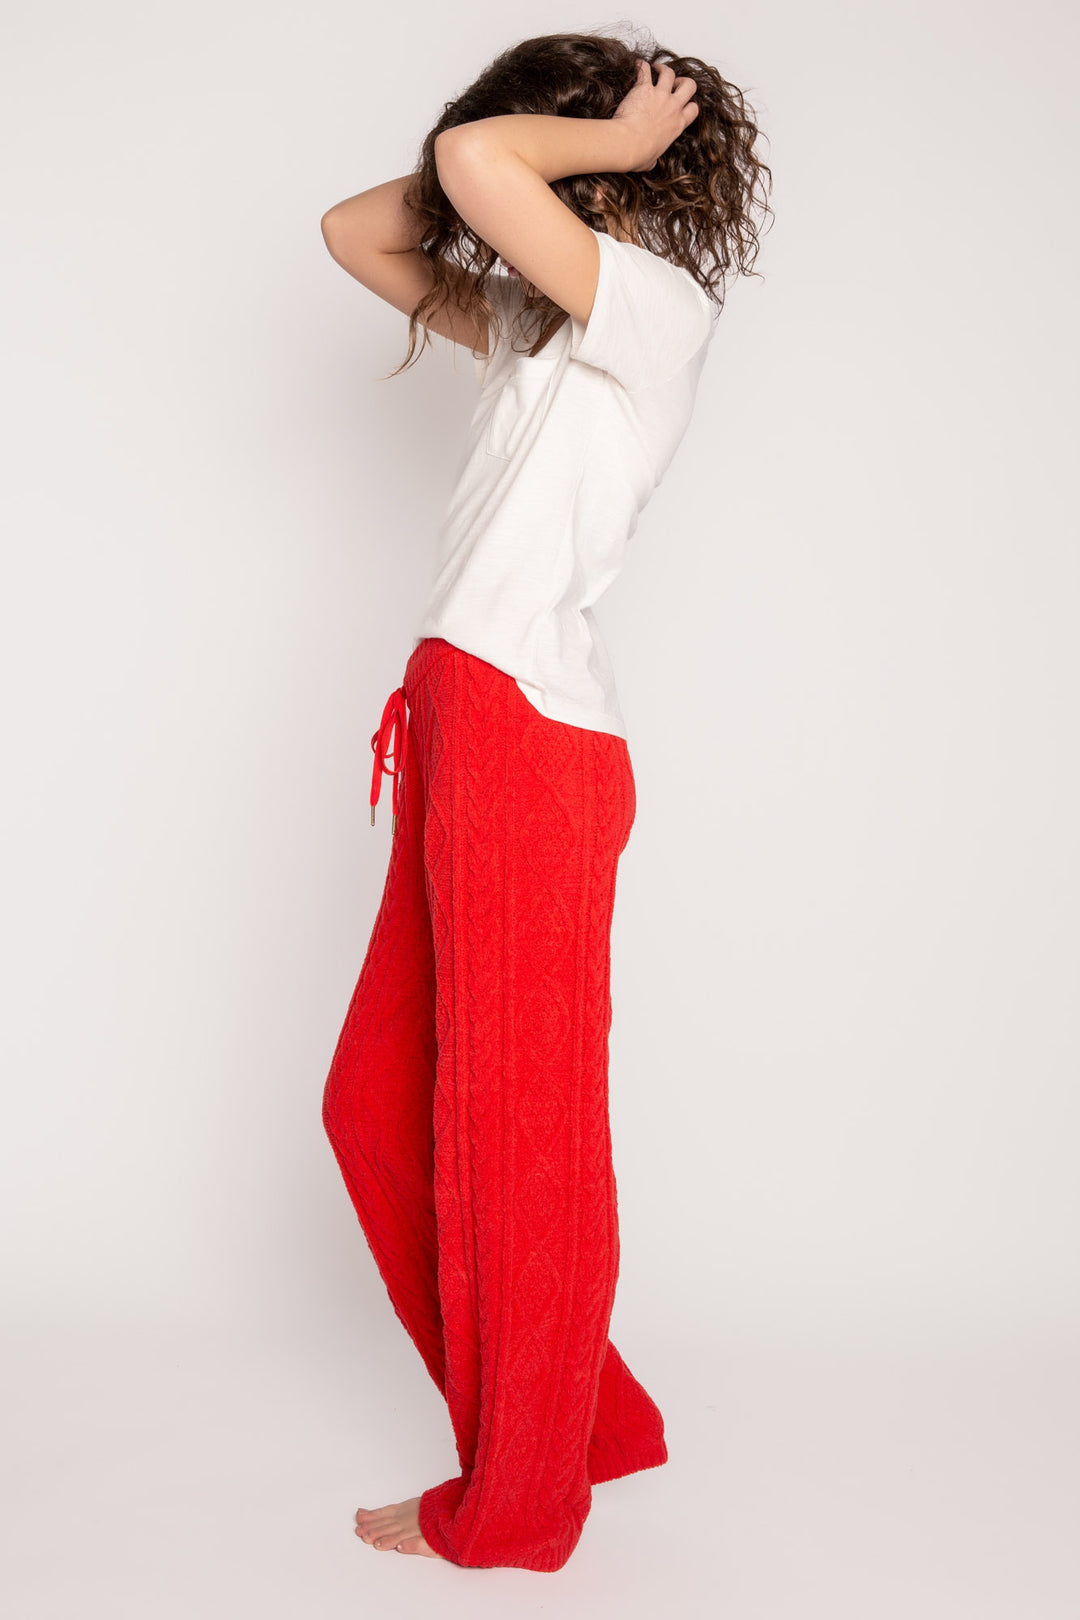 Straight leg lounge pant in red chenille knit cable pattern. Knit waist with tie. (7257678250084)